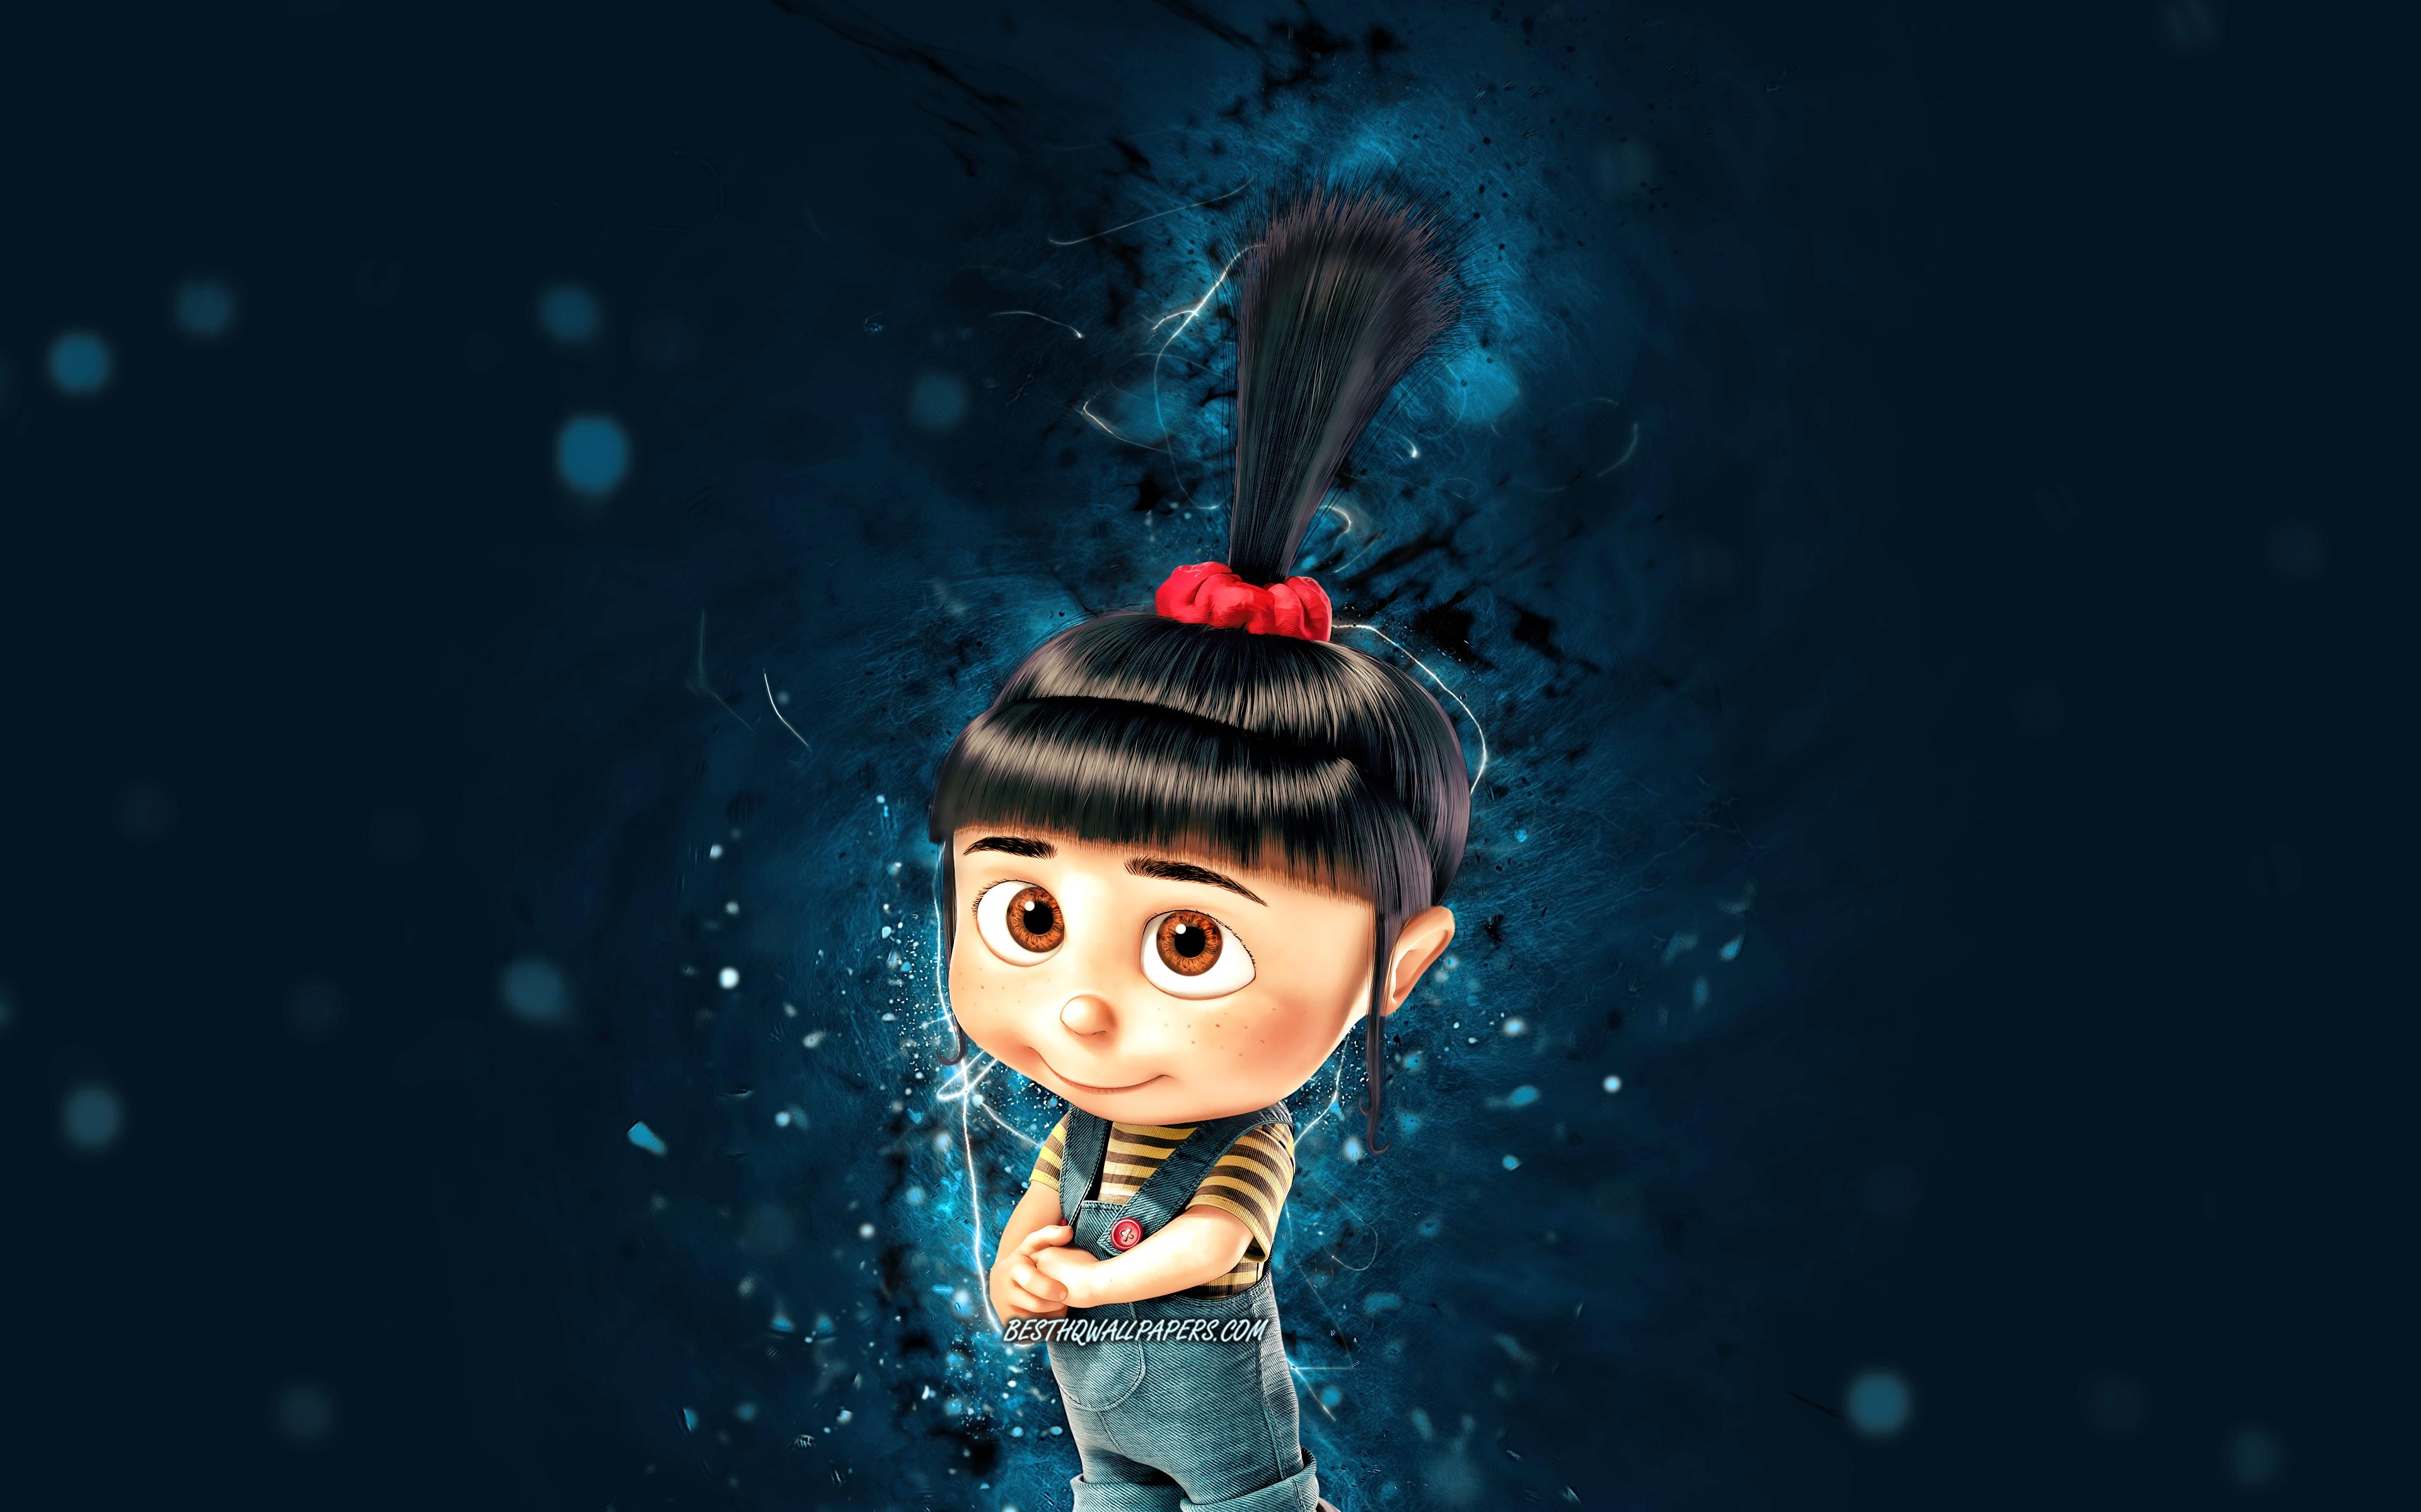 Download wallpapers Agnes 4k blue neon lights Minions The Rise